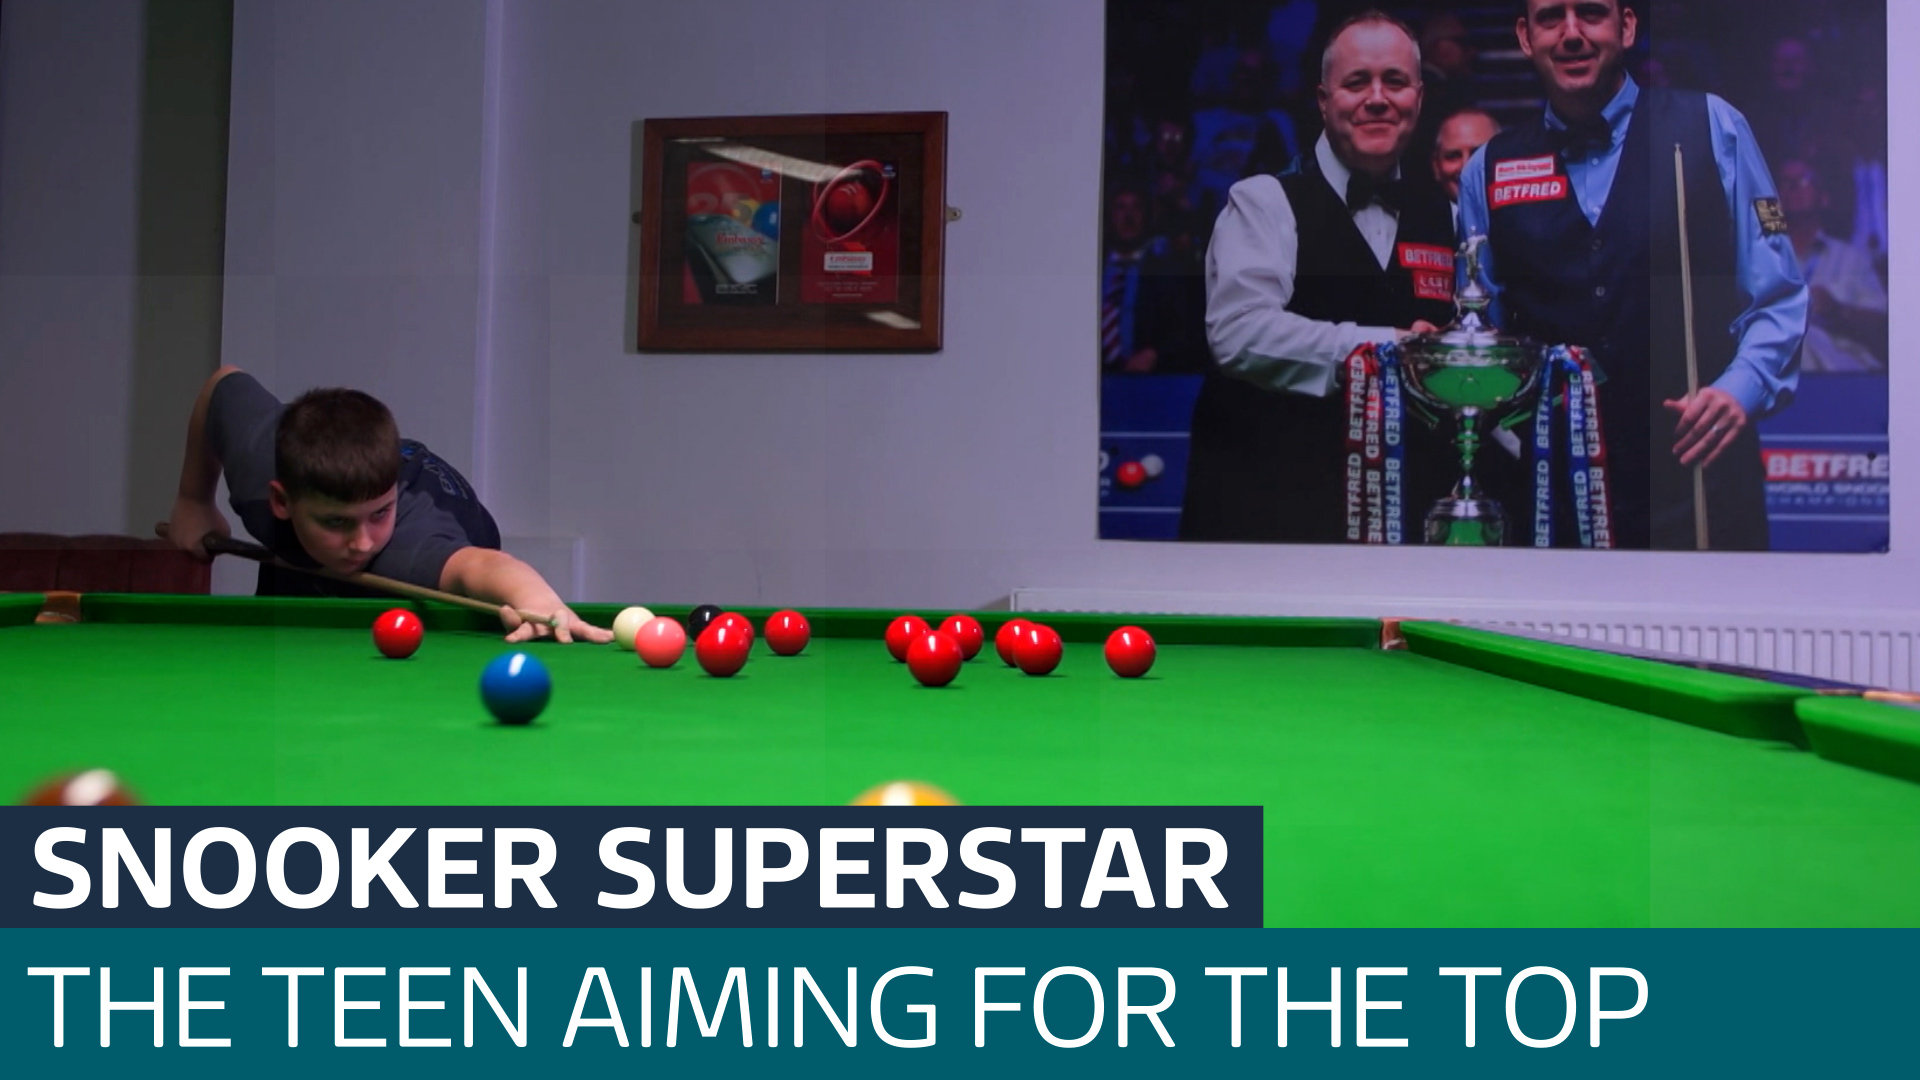 Meet the teen Snooker superstar who hopes to one day be world champion